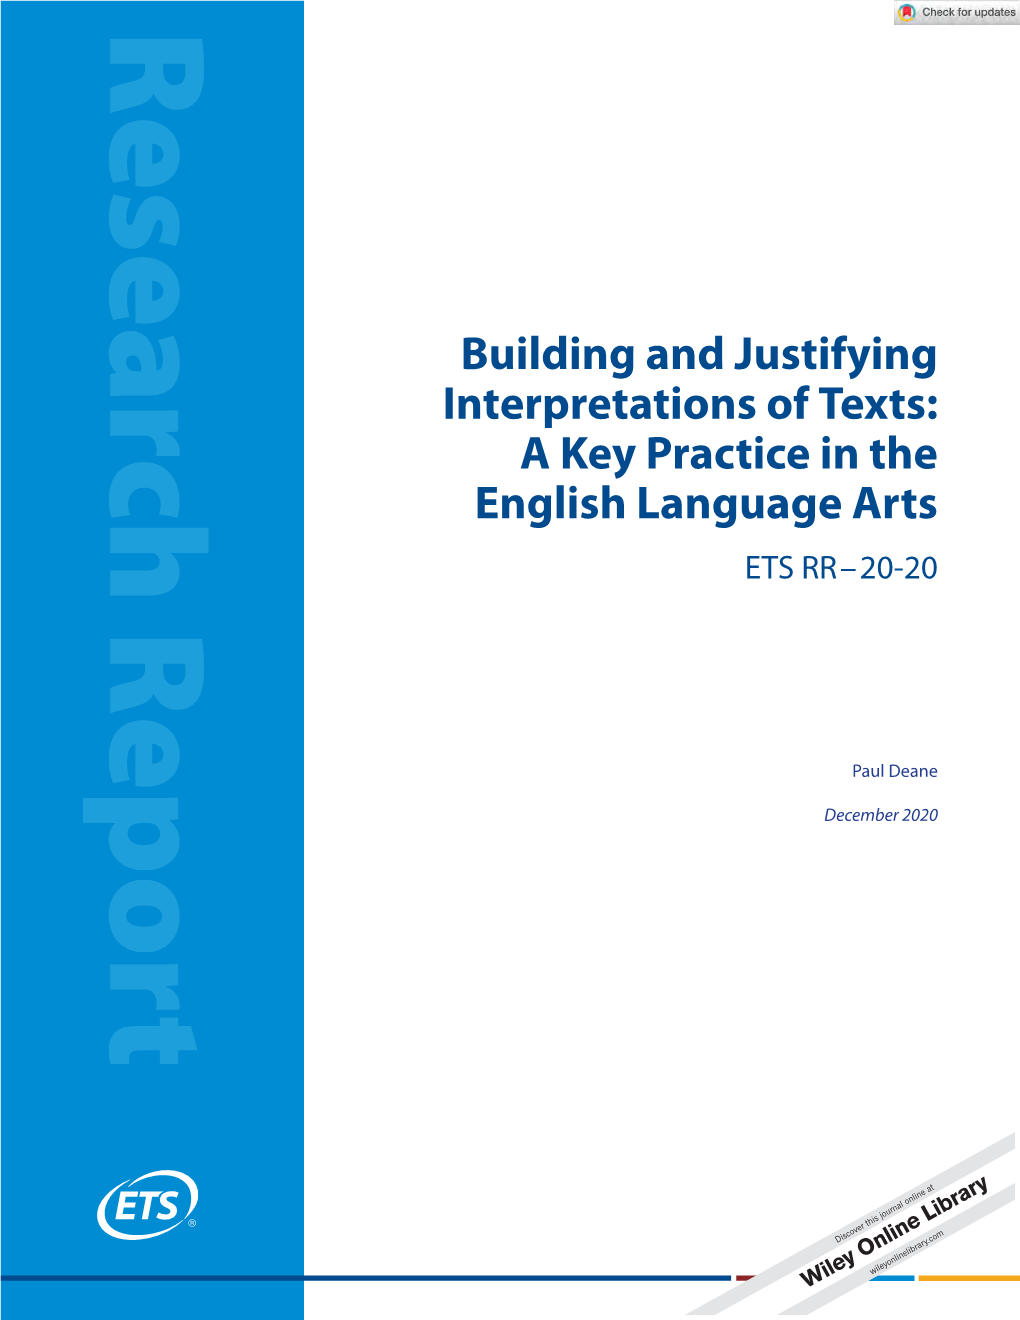 Building and Justifying Interpretations of Texts: a Key Practice in the English Language Arts